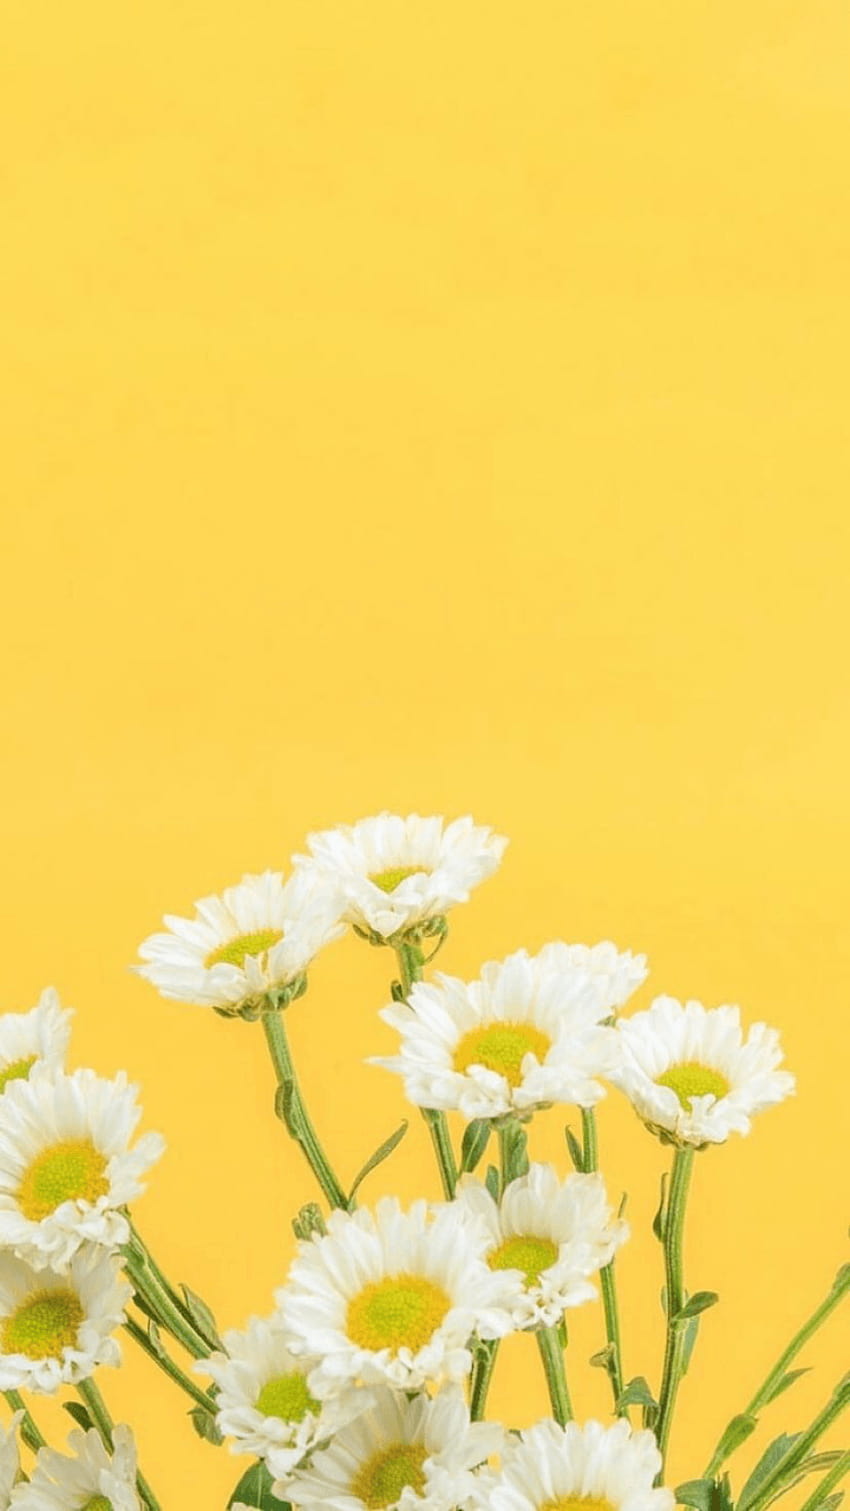 A bunch of white flowers on a yellow background - Daisy